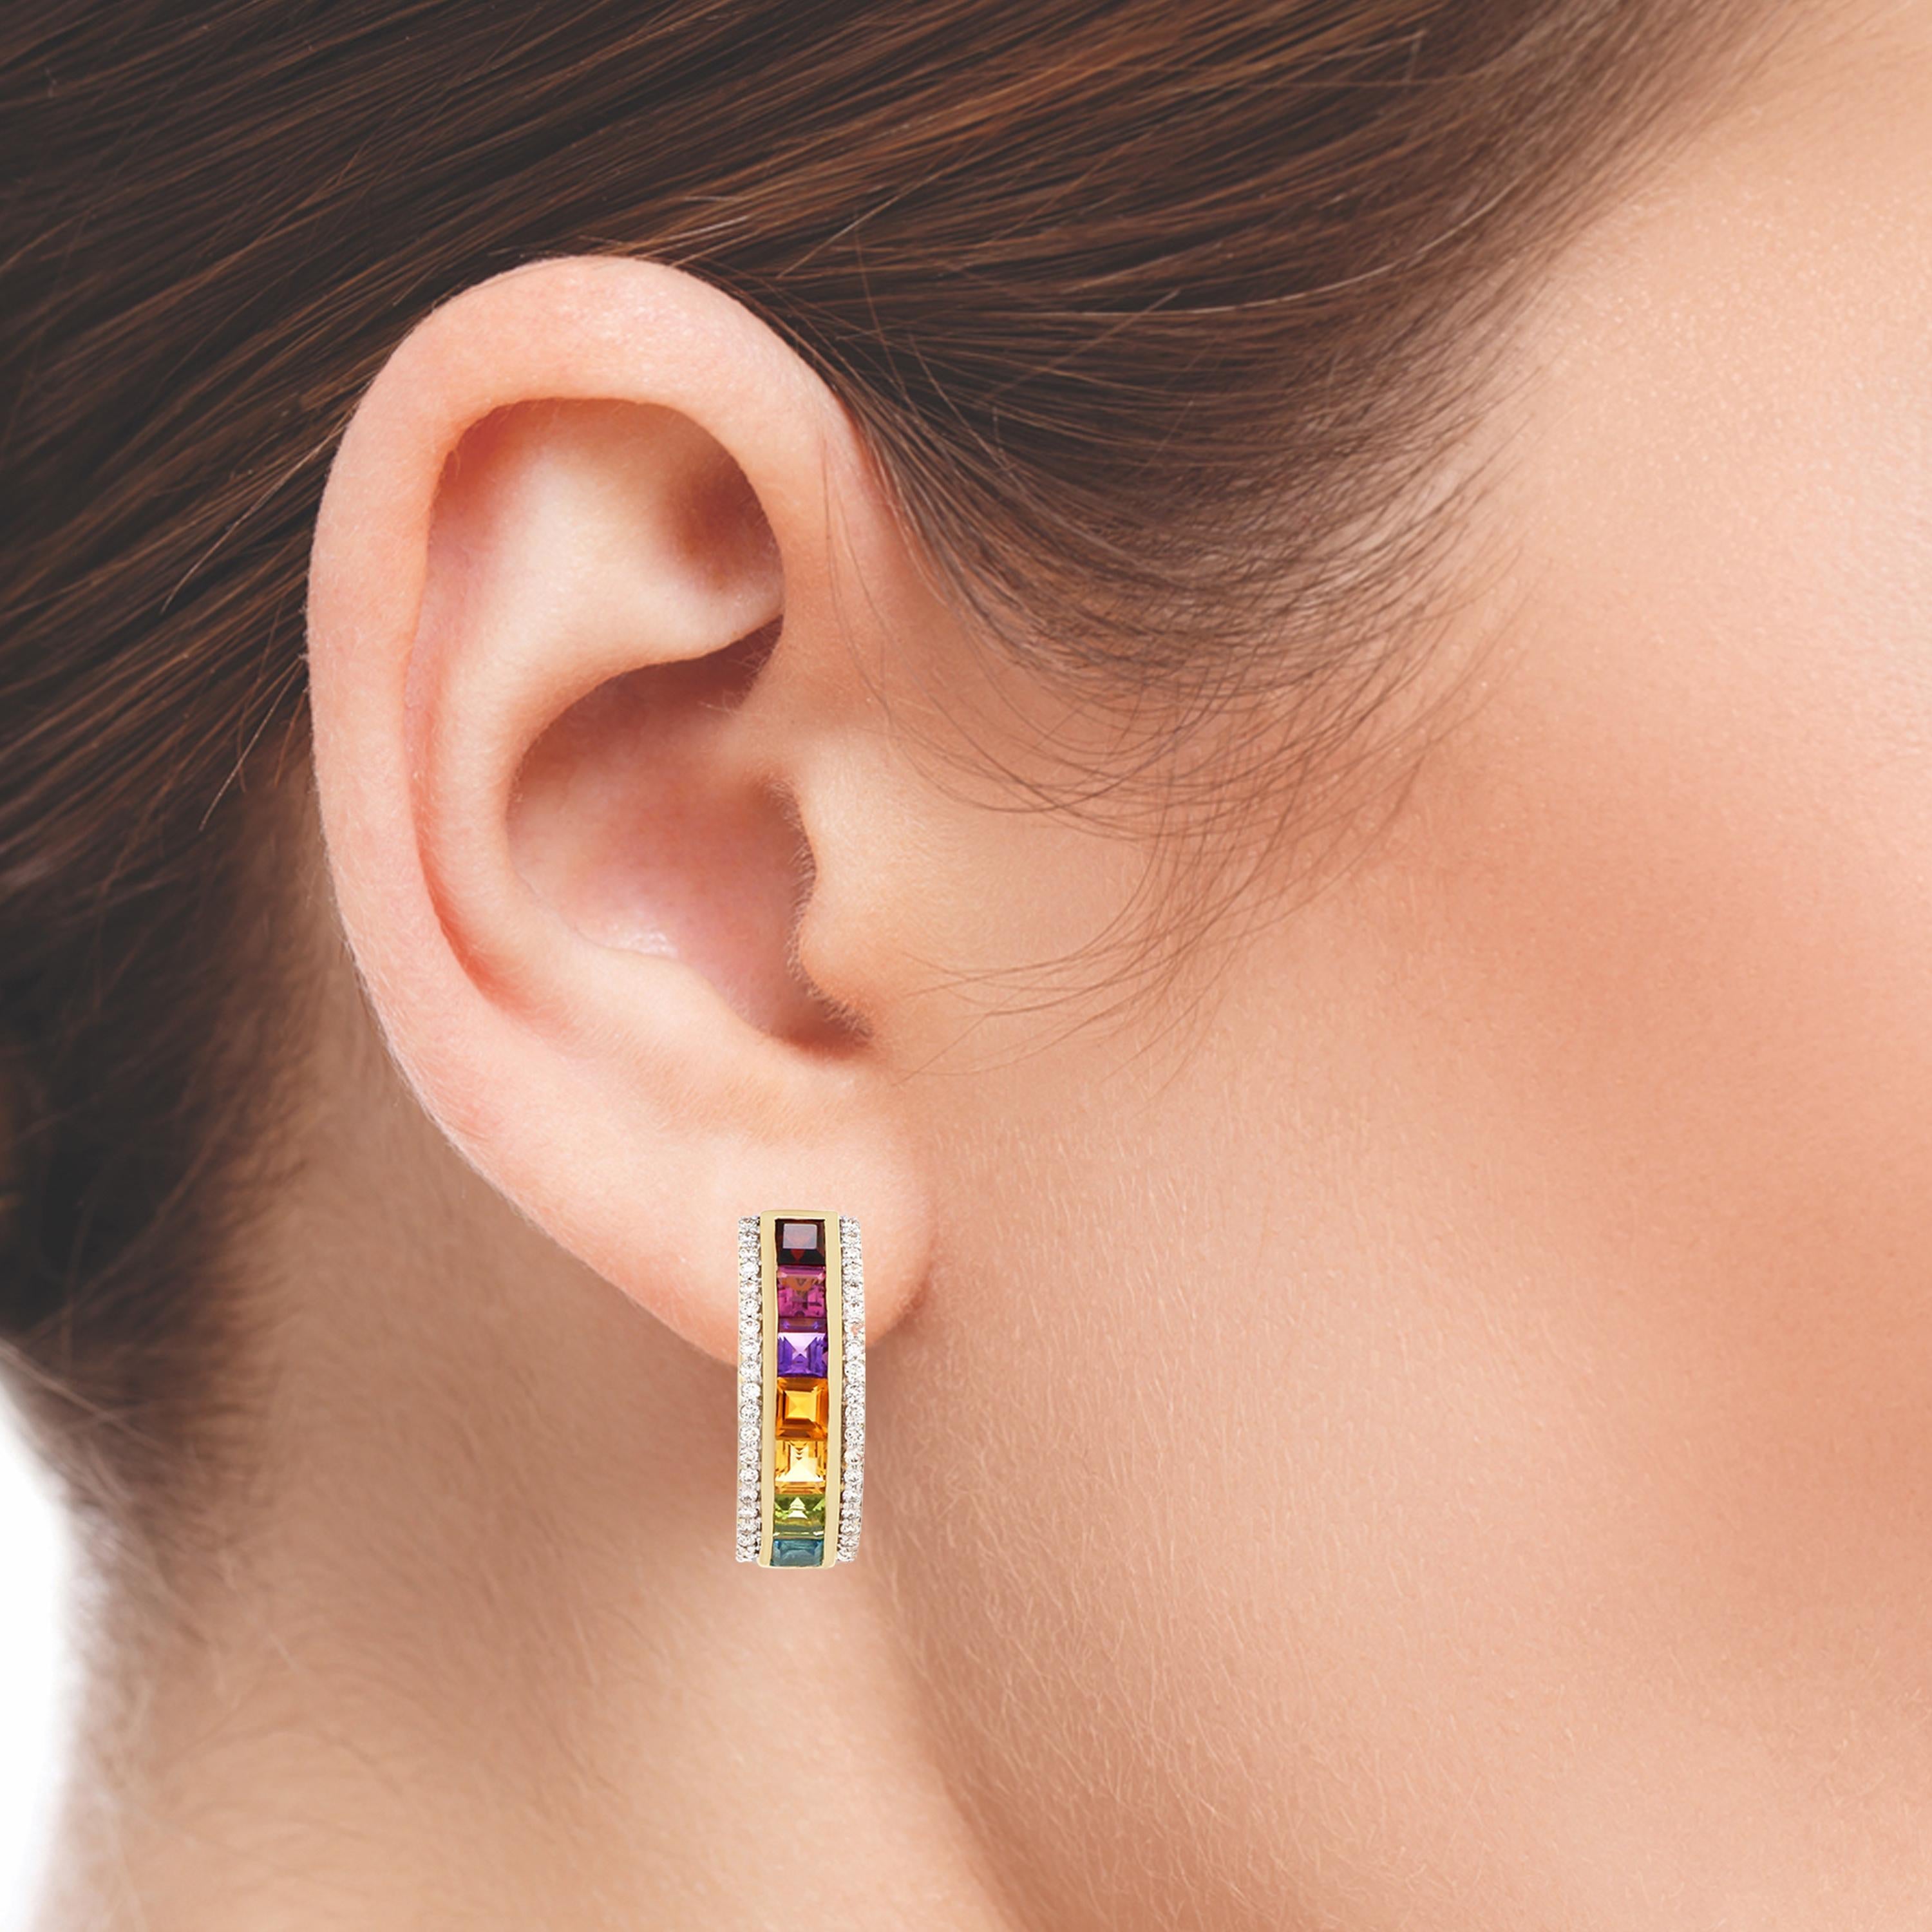 This exclusive multicolor gemstones diamond half-hoop stud earrings is exemplary. The perfectly cut square gemstones include Natural Garnet, Rhodolite, Amethyst, Citrine, Peridot, and Blue Topaz are set nicely in a channel setting are incorporated